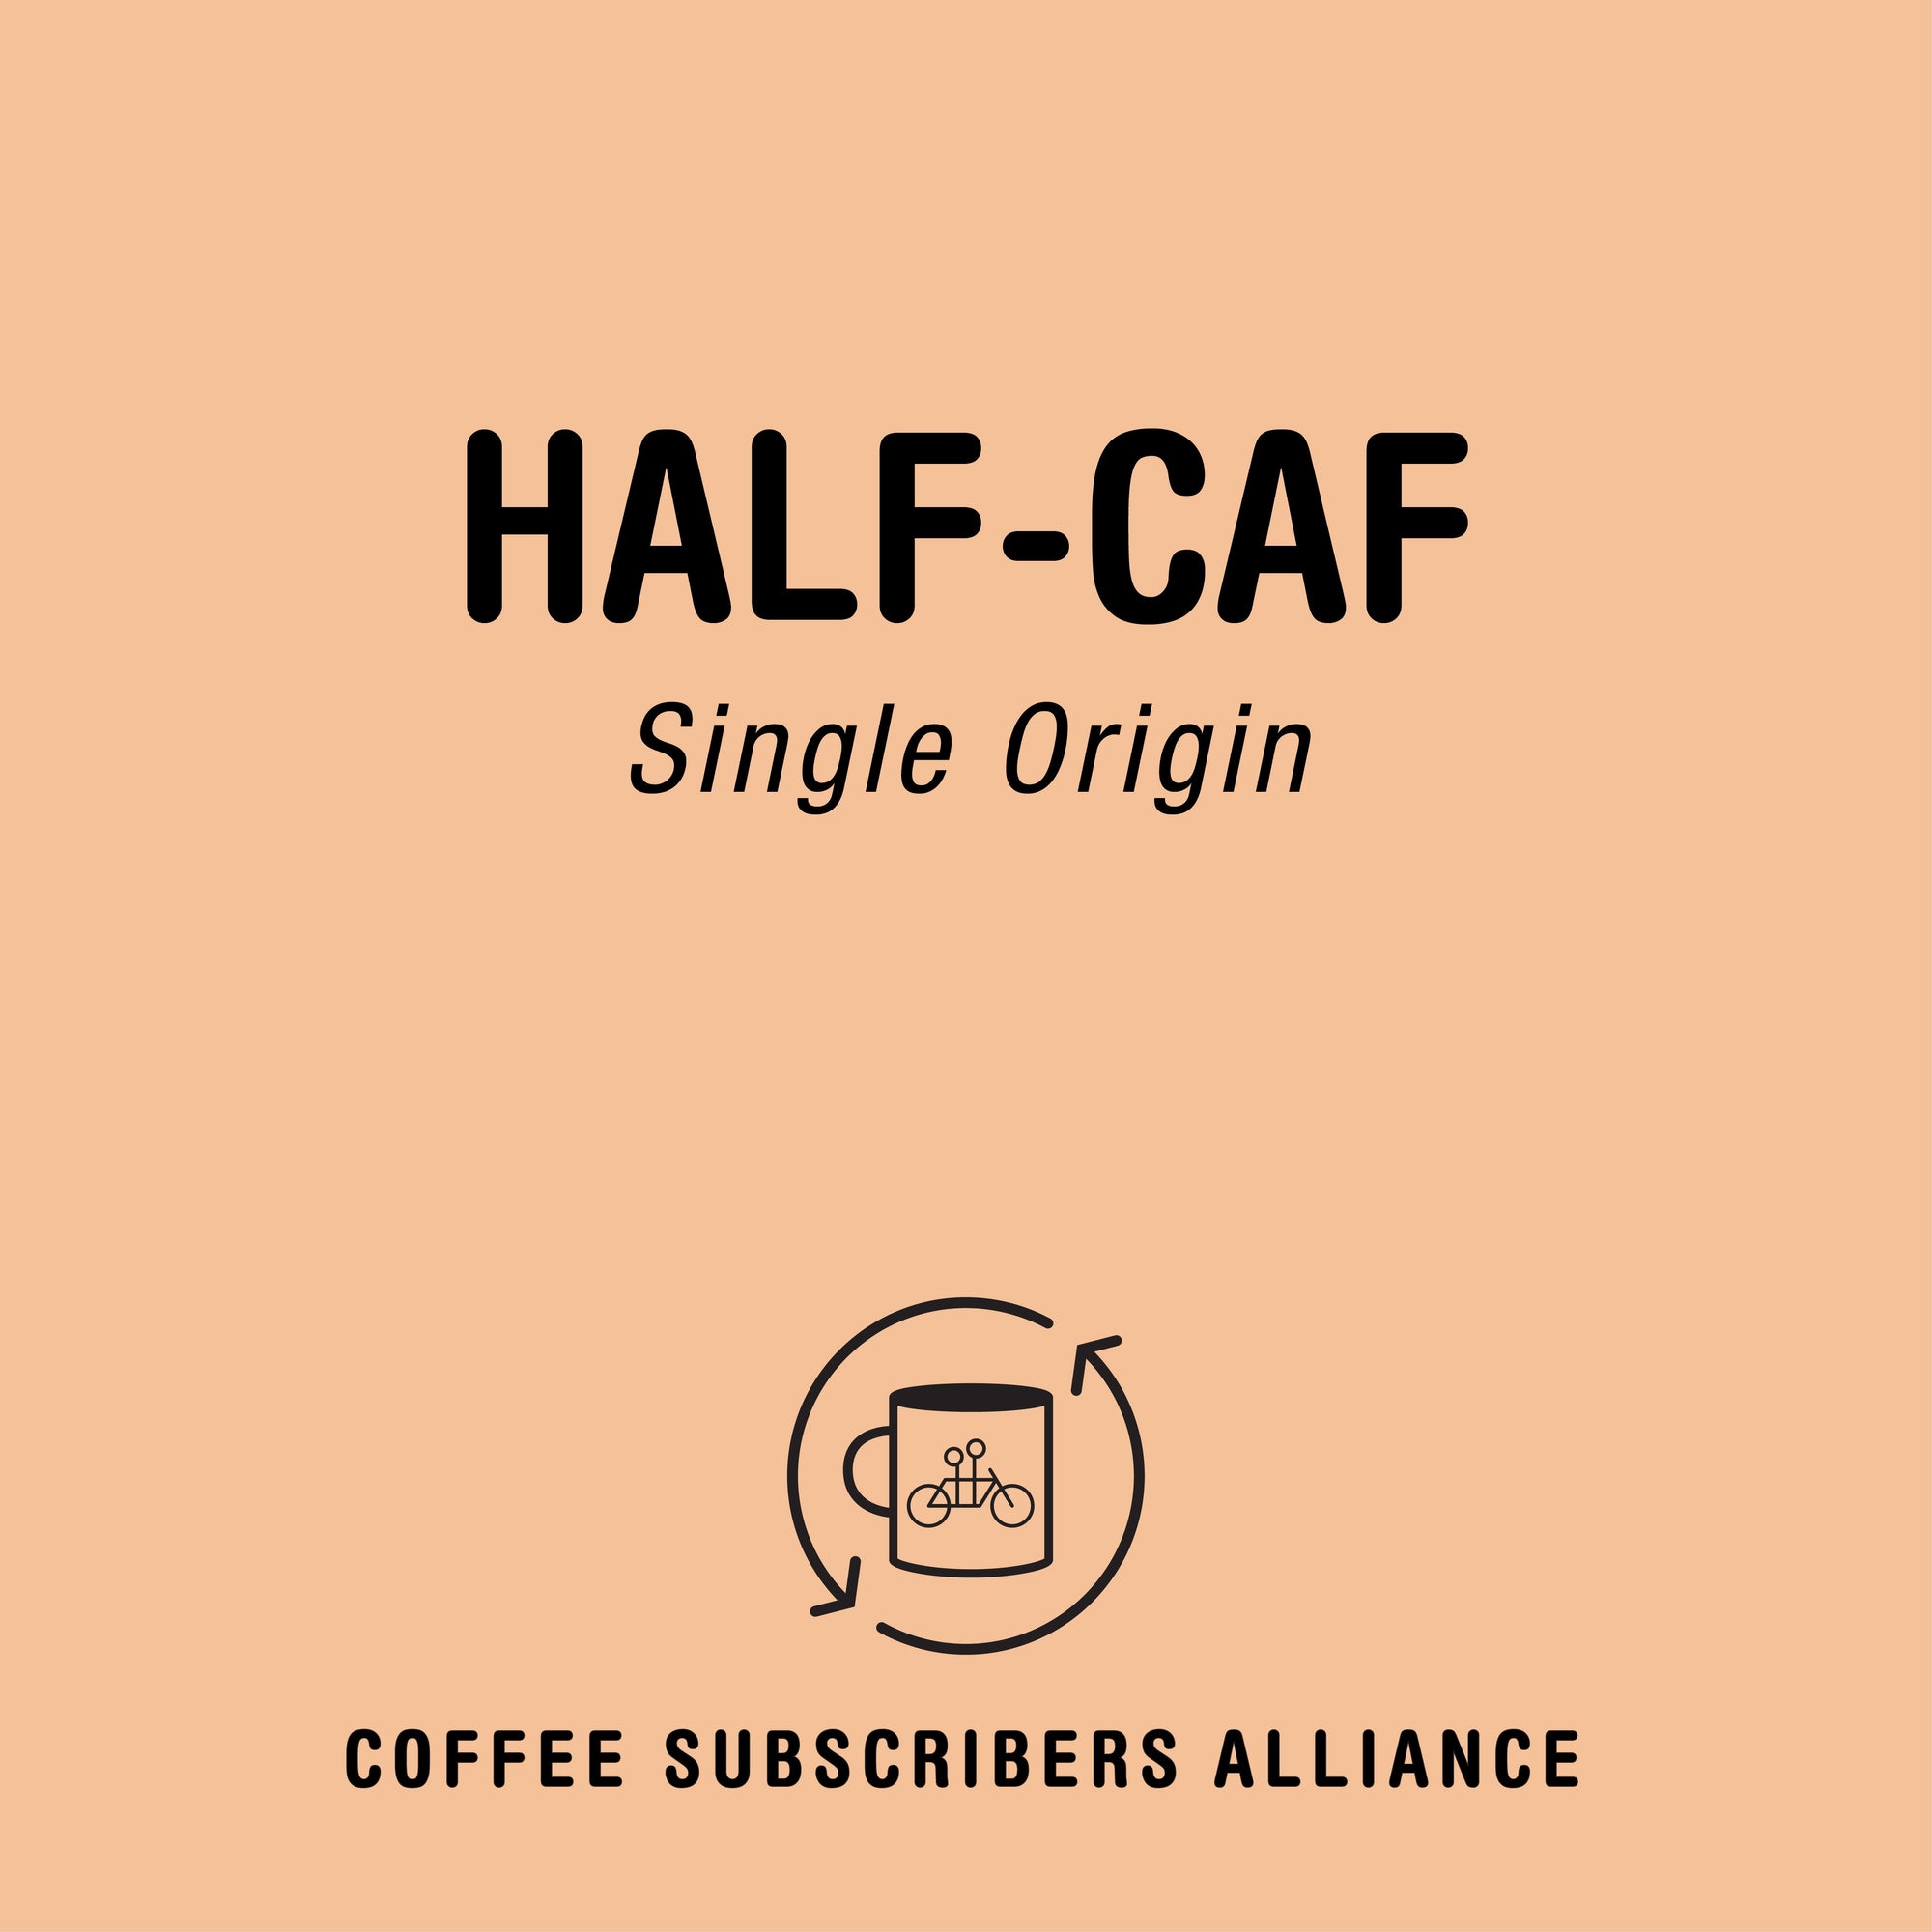 Graphic design with text "Half-Caf Subscription Gift 8 Weeks x 3" at the top and the logo of Tandem featuring a coffee cup and beans at the bottom, set against a peach background.